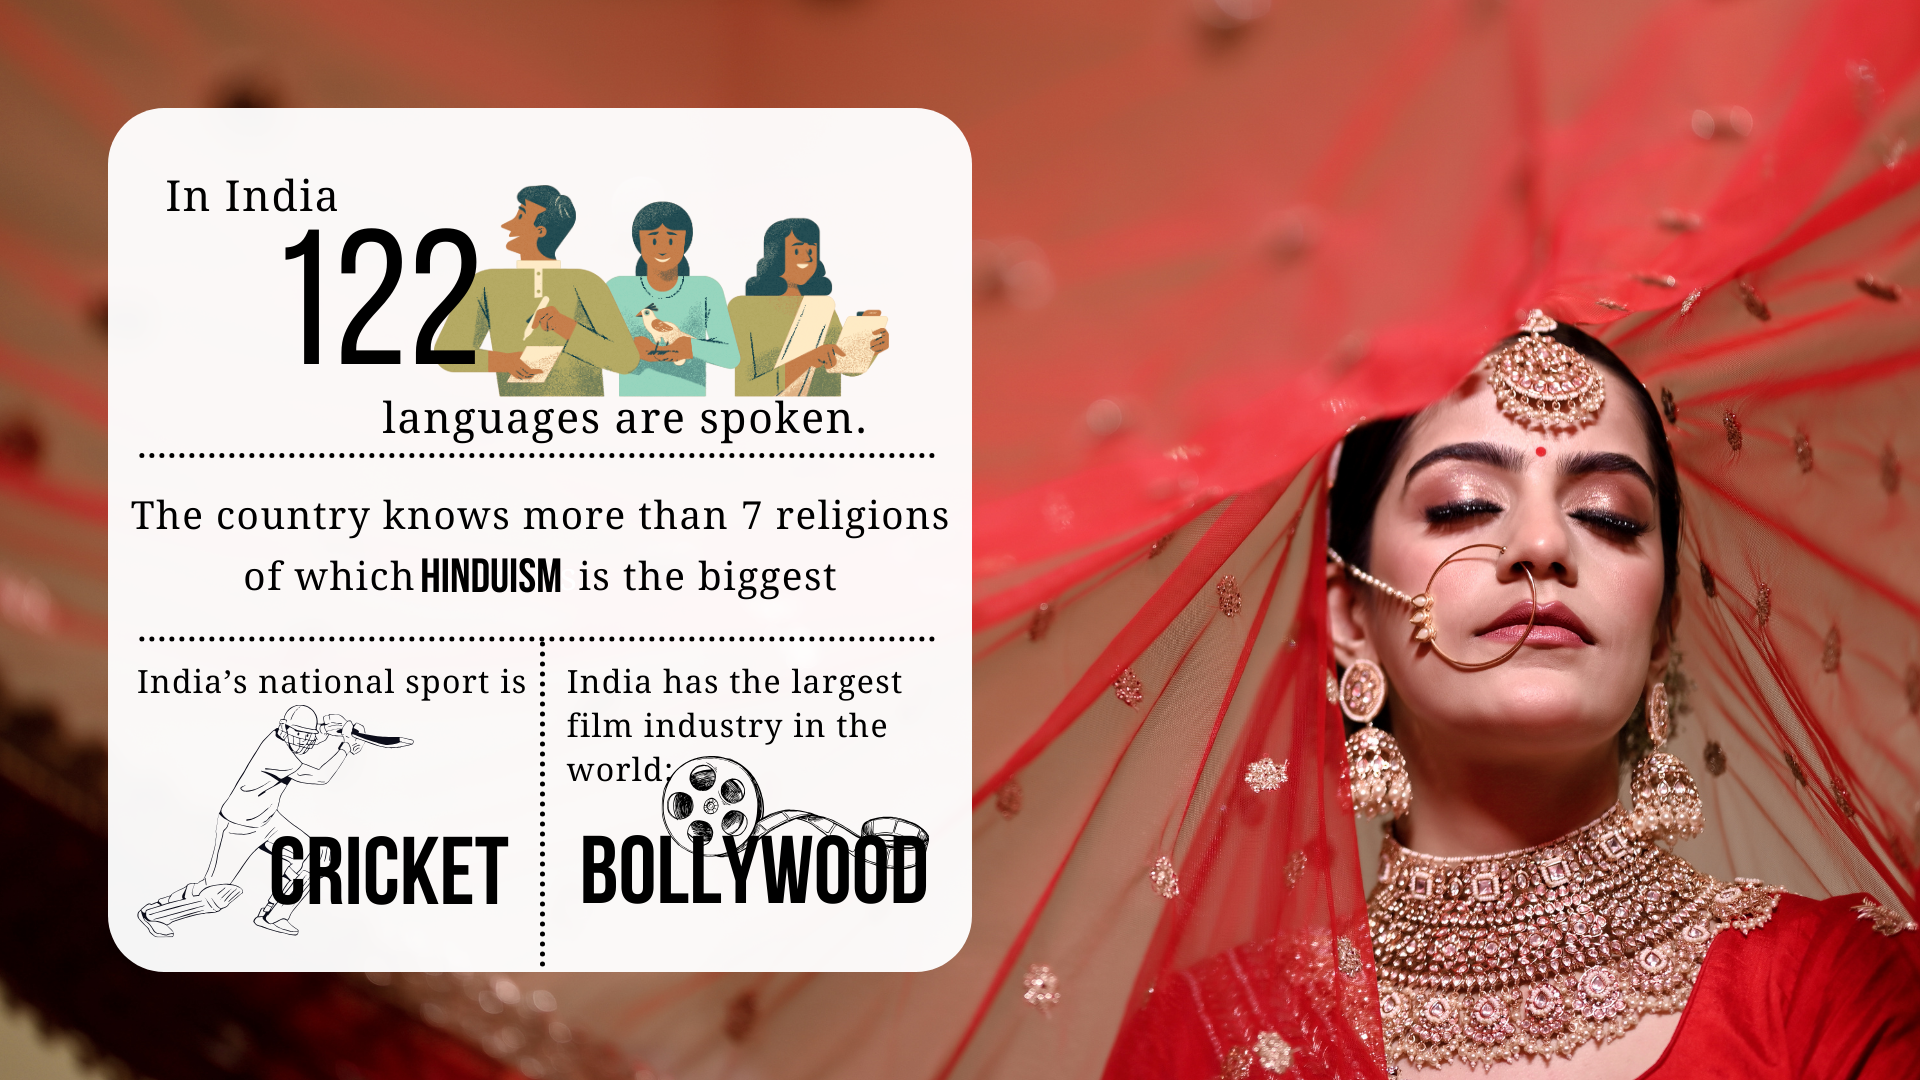 In India 122 languages are spoken, there are 6 main religions of which Hinduism is the biggest; India's national sport is cricket and it has the largest film industry in the world: Bollywood.